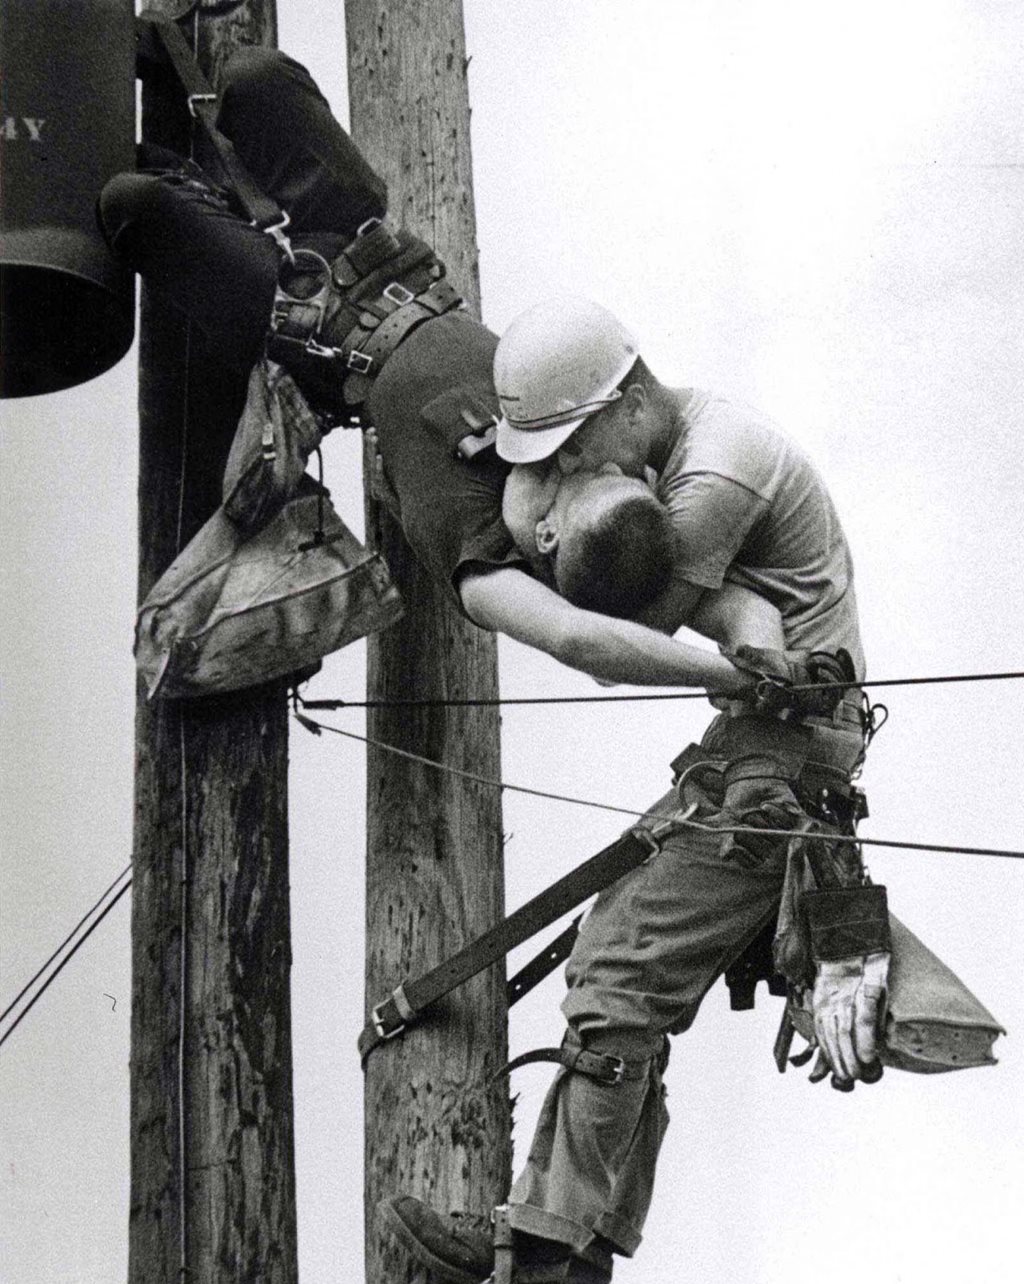 JEA apprentice lineman Randall Champion receiving mouth-to-mouth resuscitation